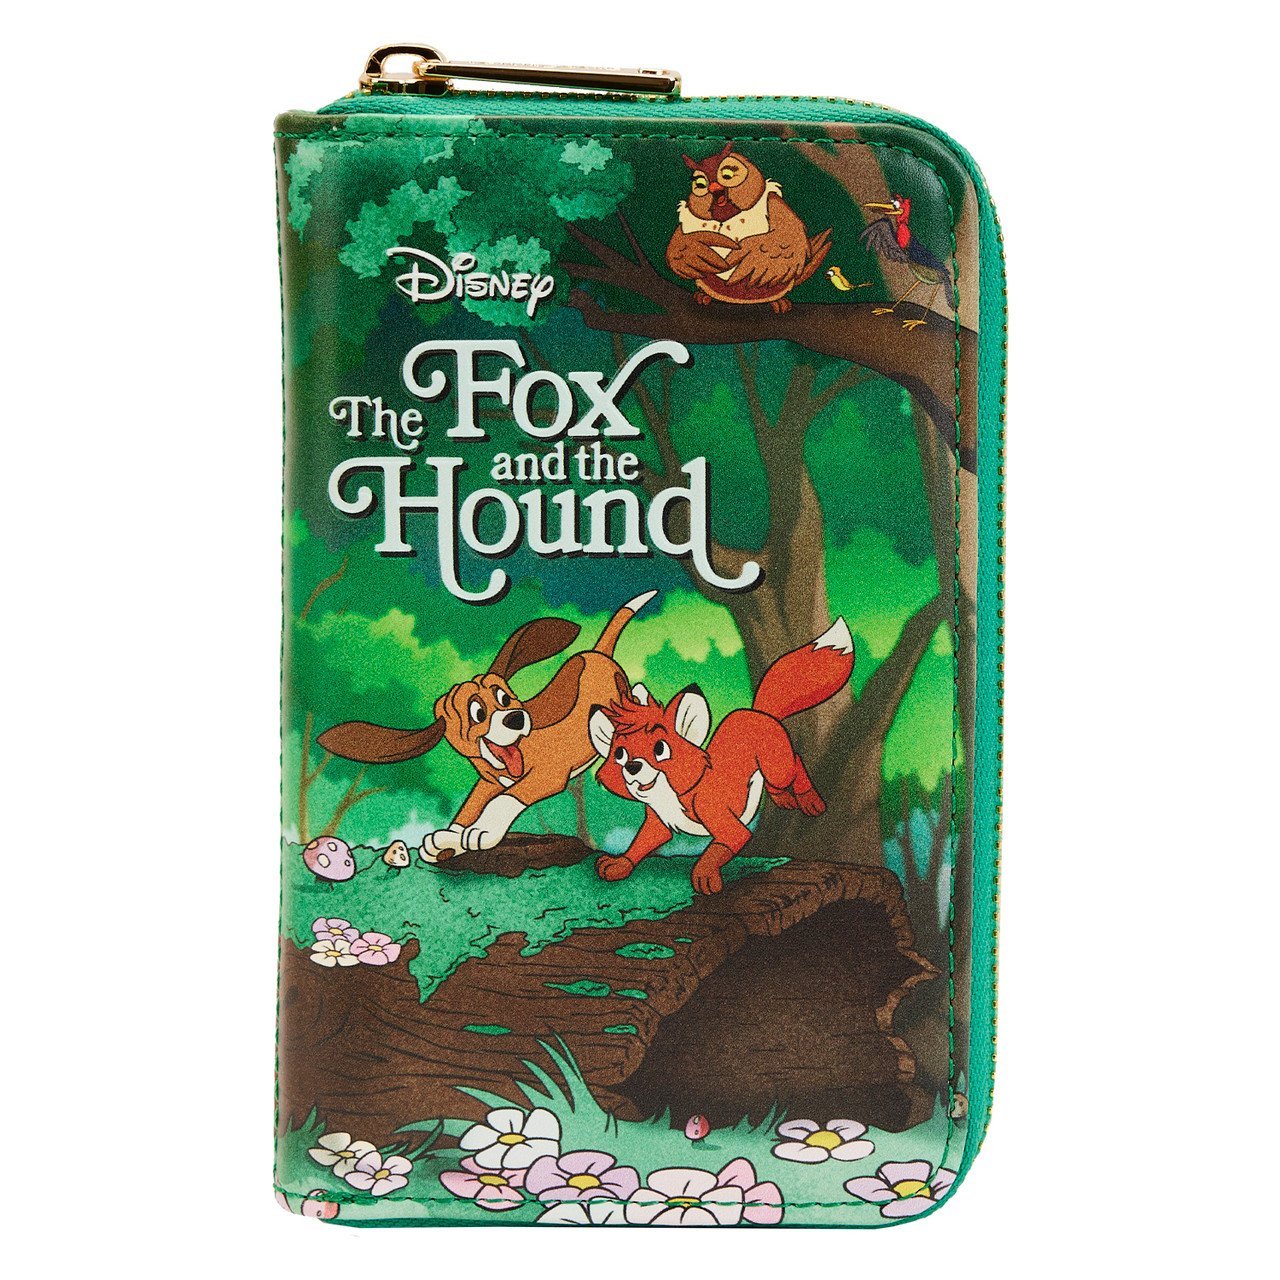 The Fox and the Hound Book